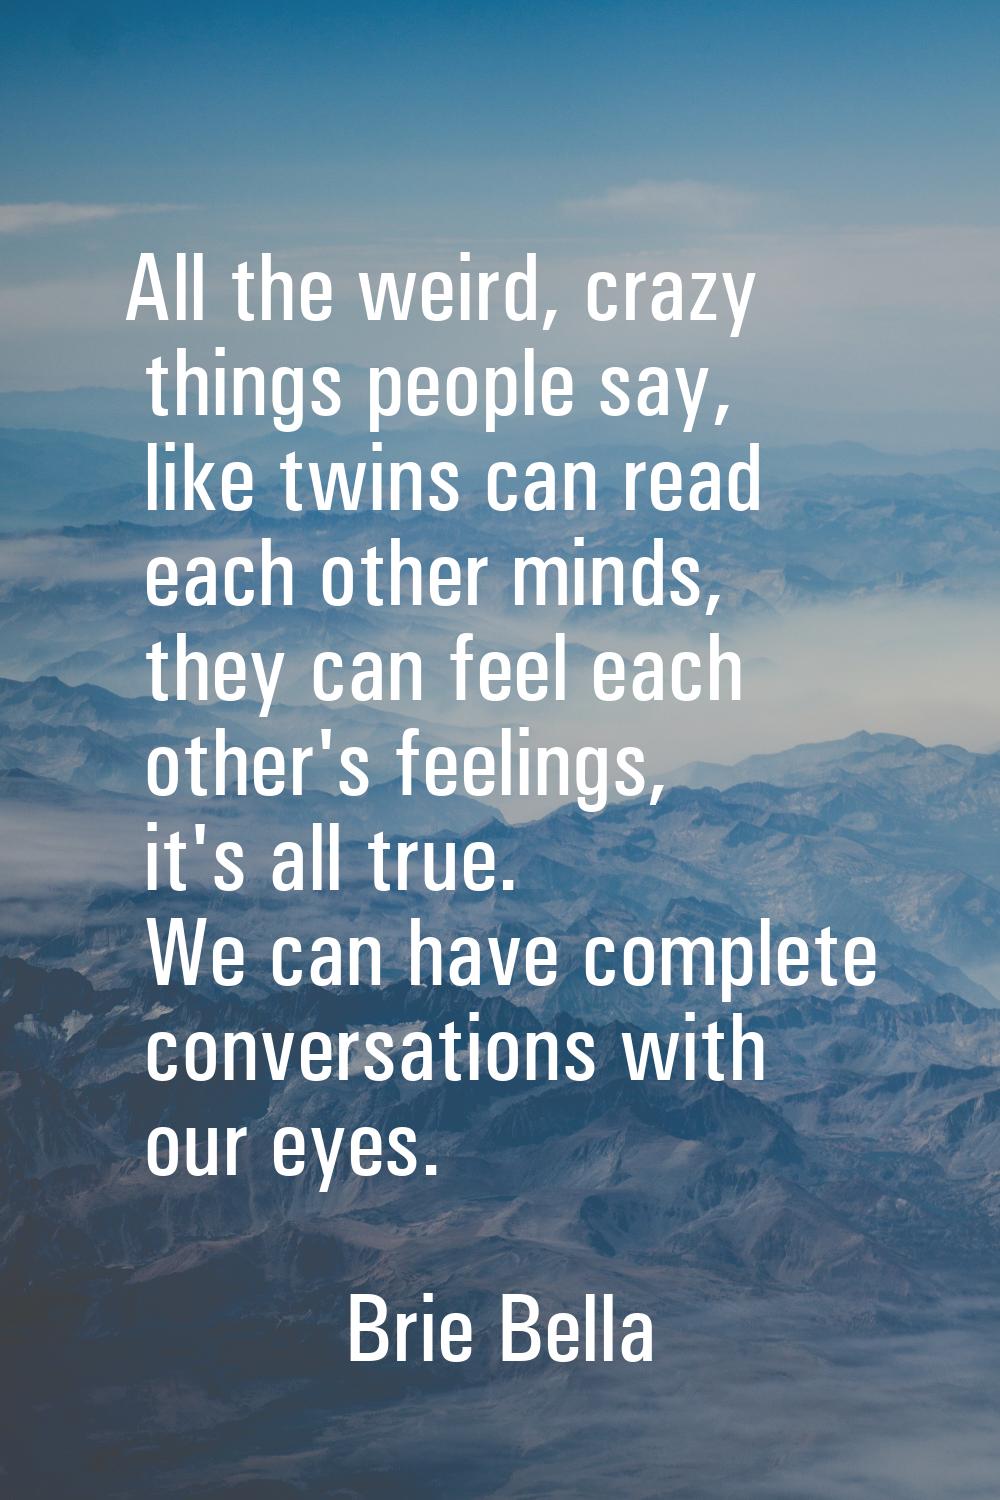 All the weird, crazy things people say, like twins can read each other minds, they can feel each ot